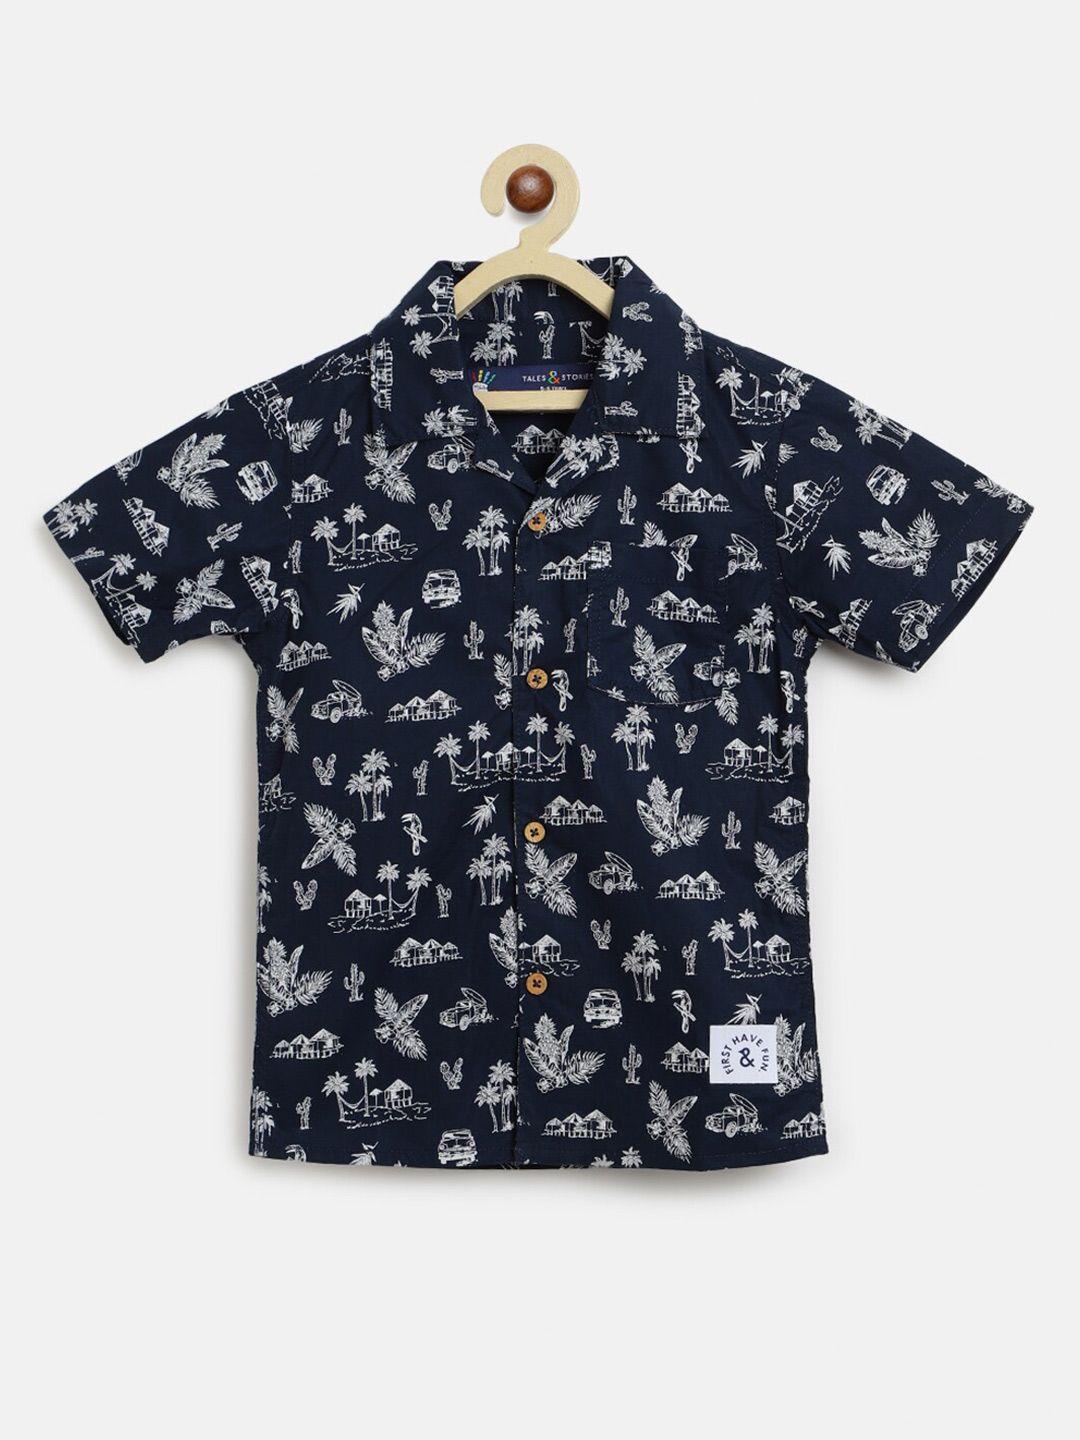 tales & stories boys navy blue printed casual shirt